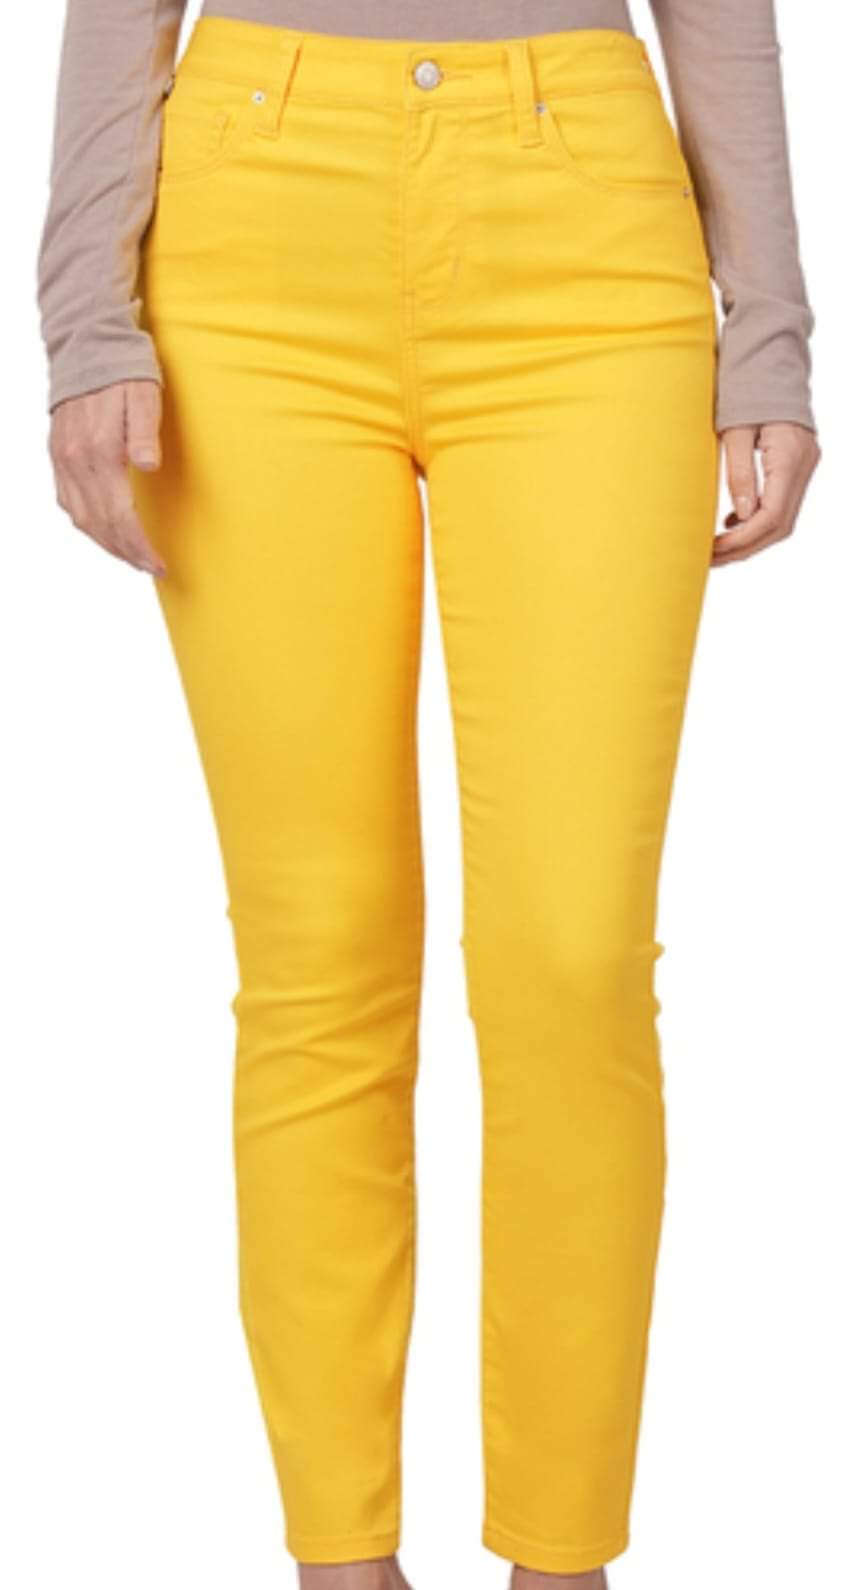 Zenana Stretchy High Rise Skinny Denim Pants / Comes in Yellow, Kelly Green & Purple / Sizes Small - XL